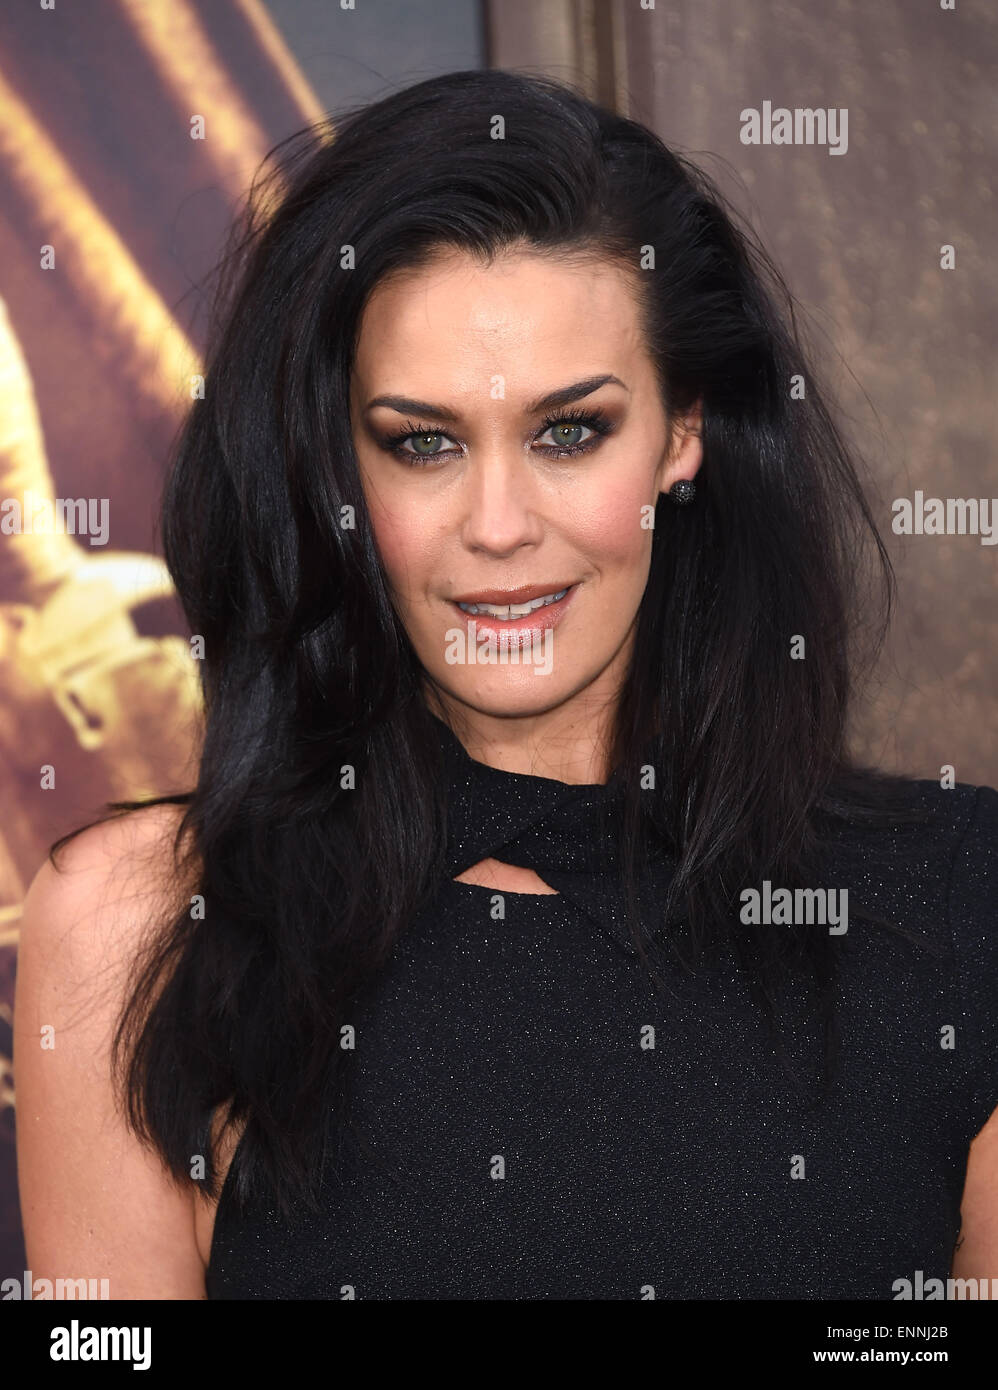 Hollywood, California, USA. 7th May, 2015. Megan Gale arrives for the premiere of the film 'Mad Max: Fury Road' at the Chinese theater. © Lisa O'Connor/ZUMA Wire/Alamy Live News Stock Photo